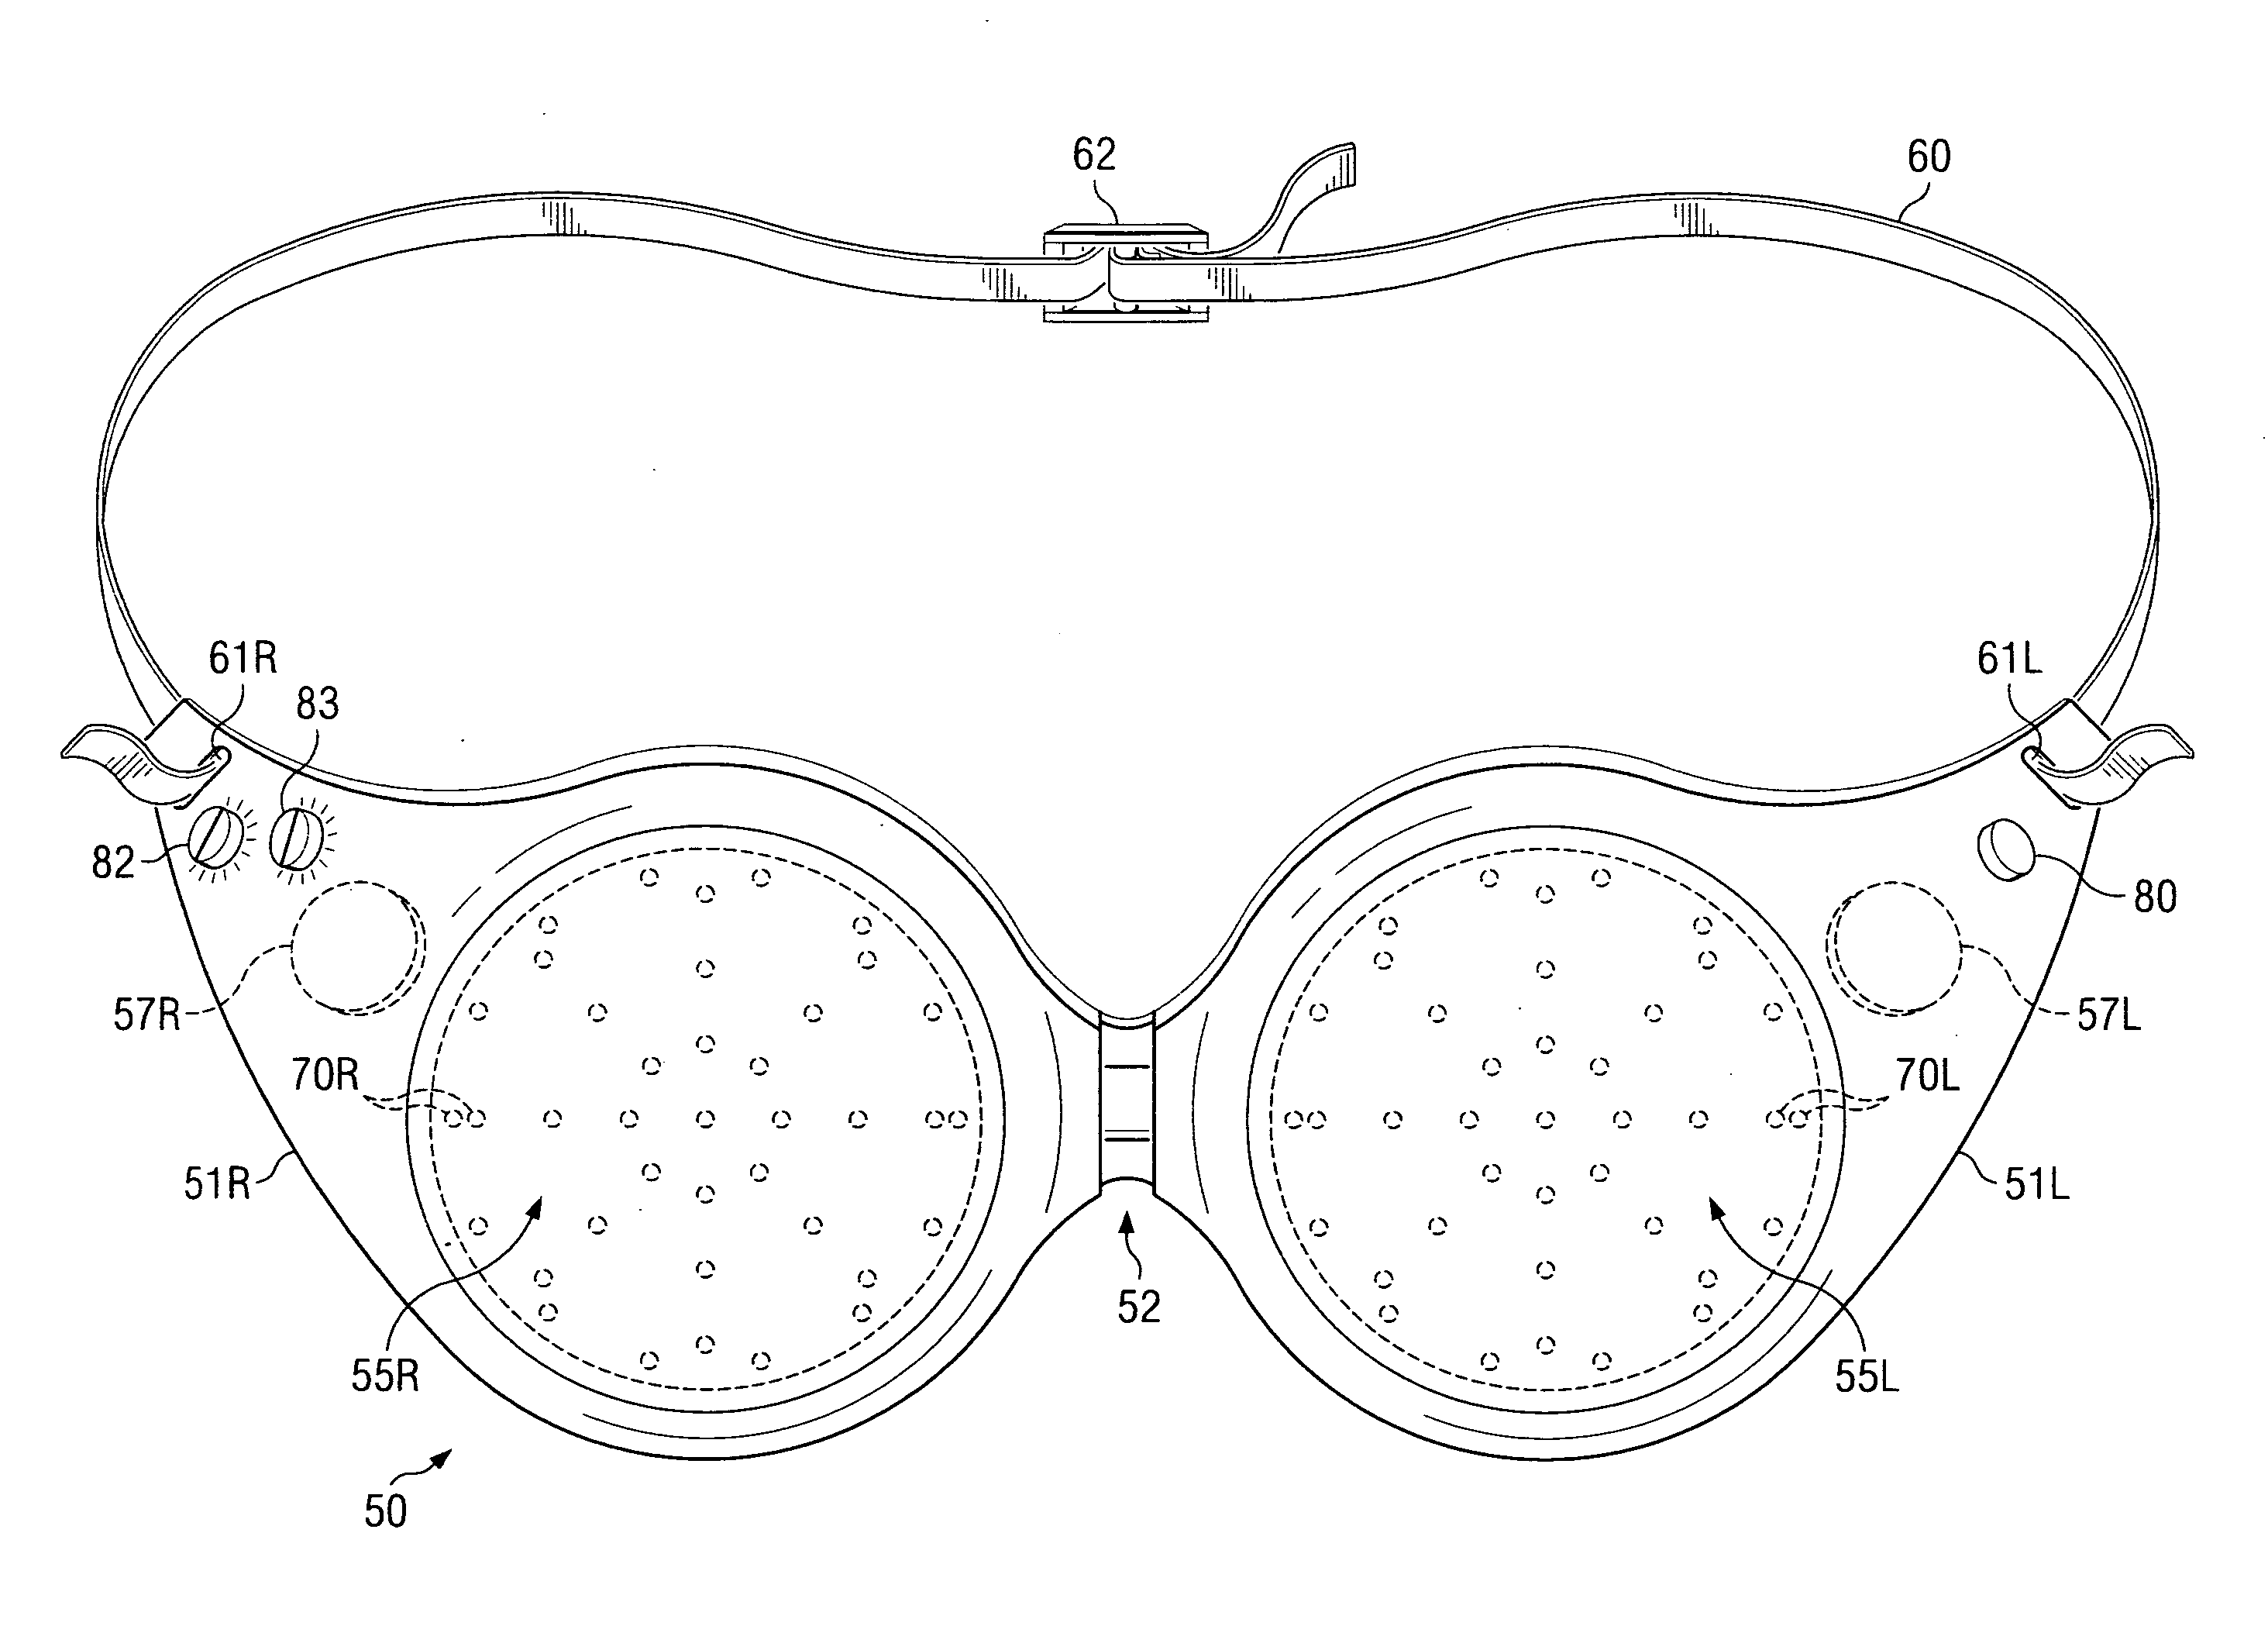 Apparatus and method for eye exercises